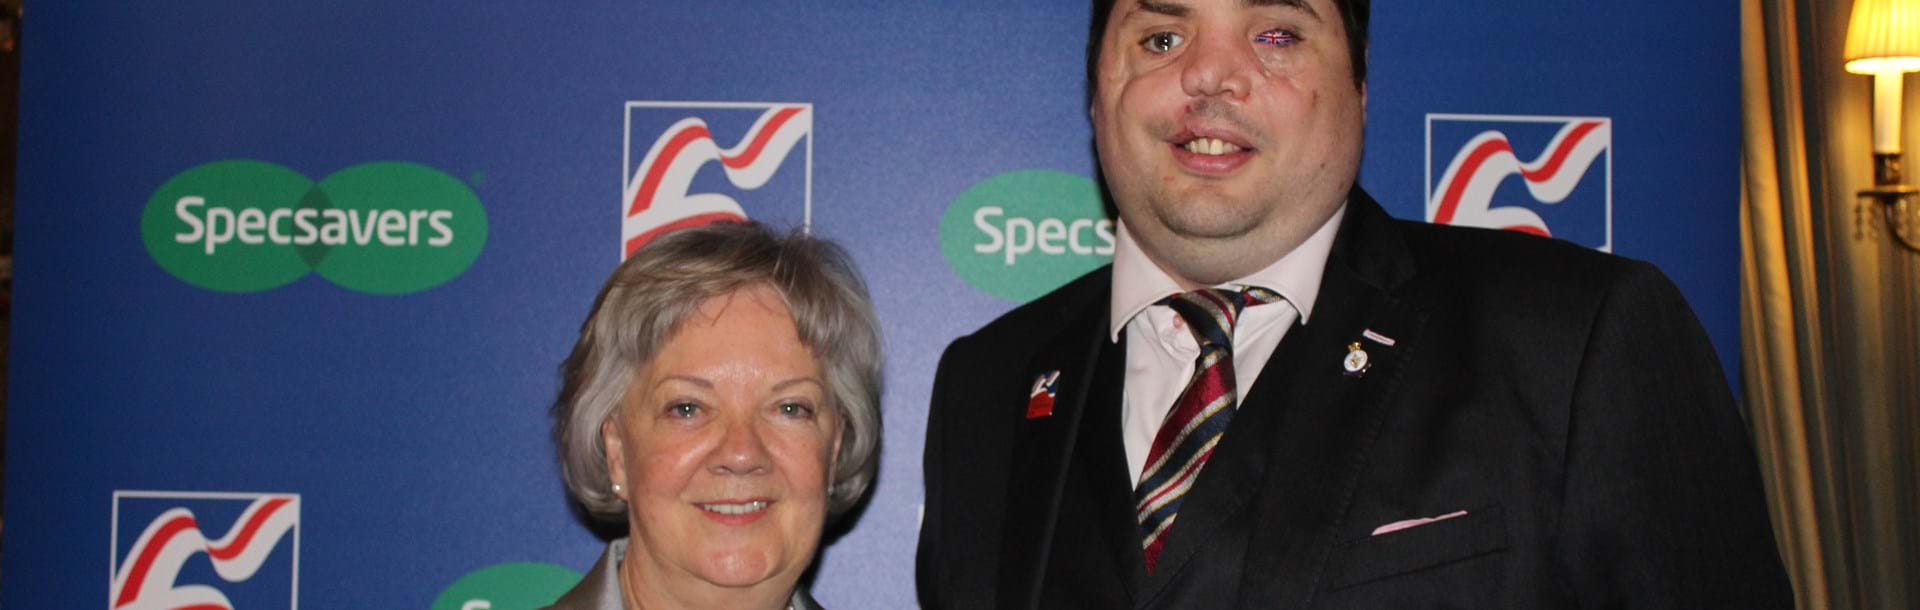 A photo of Dame Mary Perkins of Specsavers and Simon Brown Blind Veteran